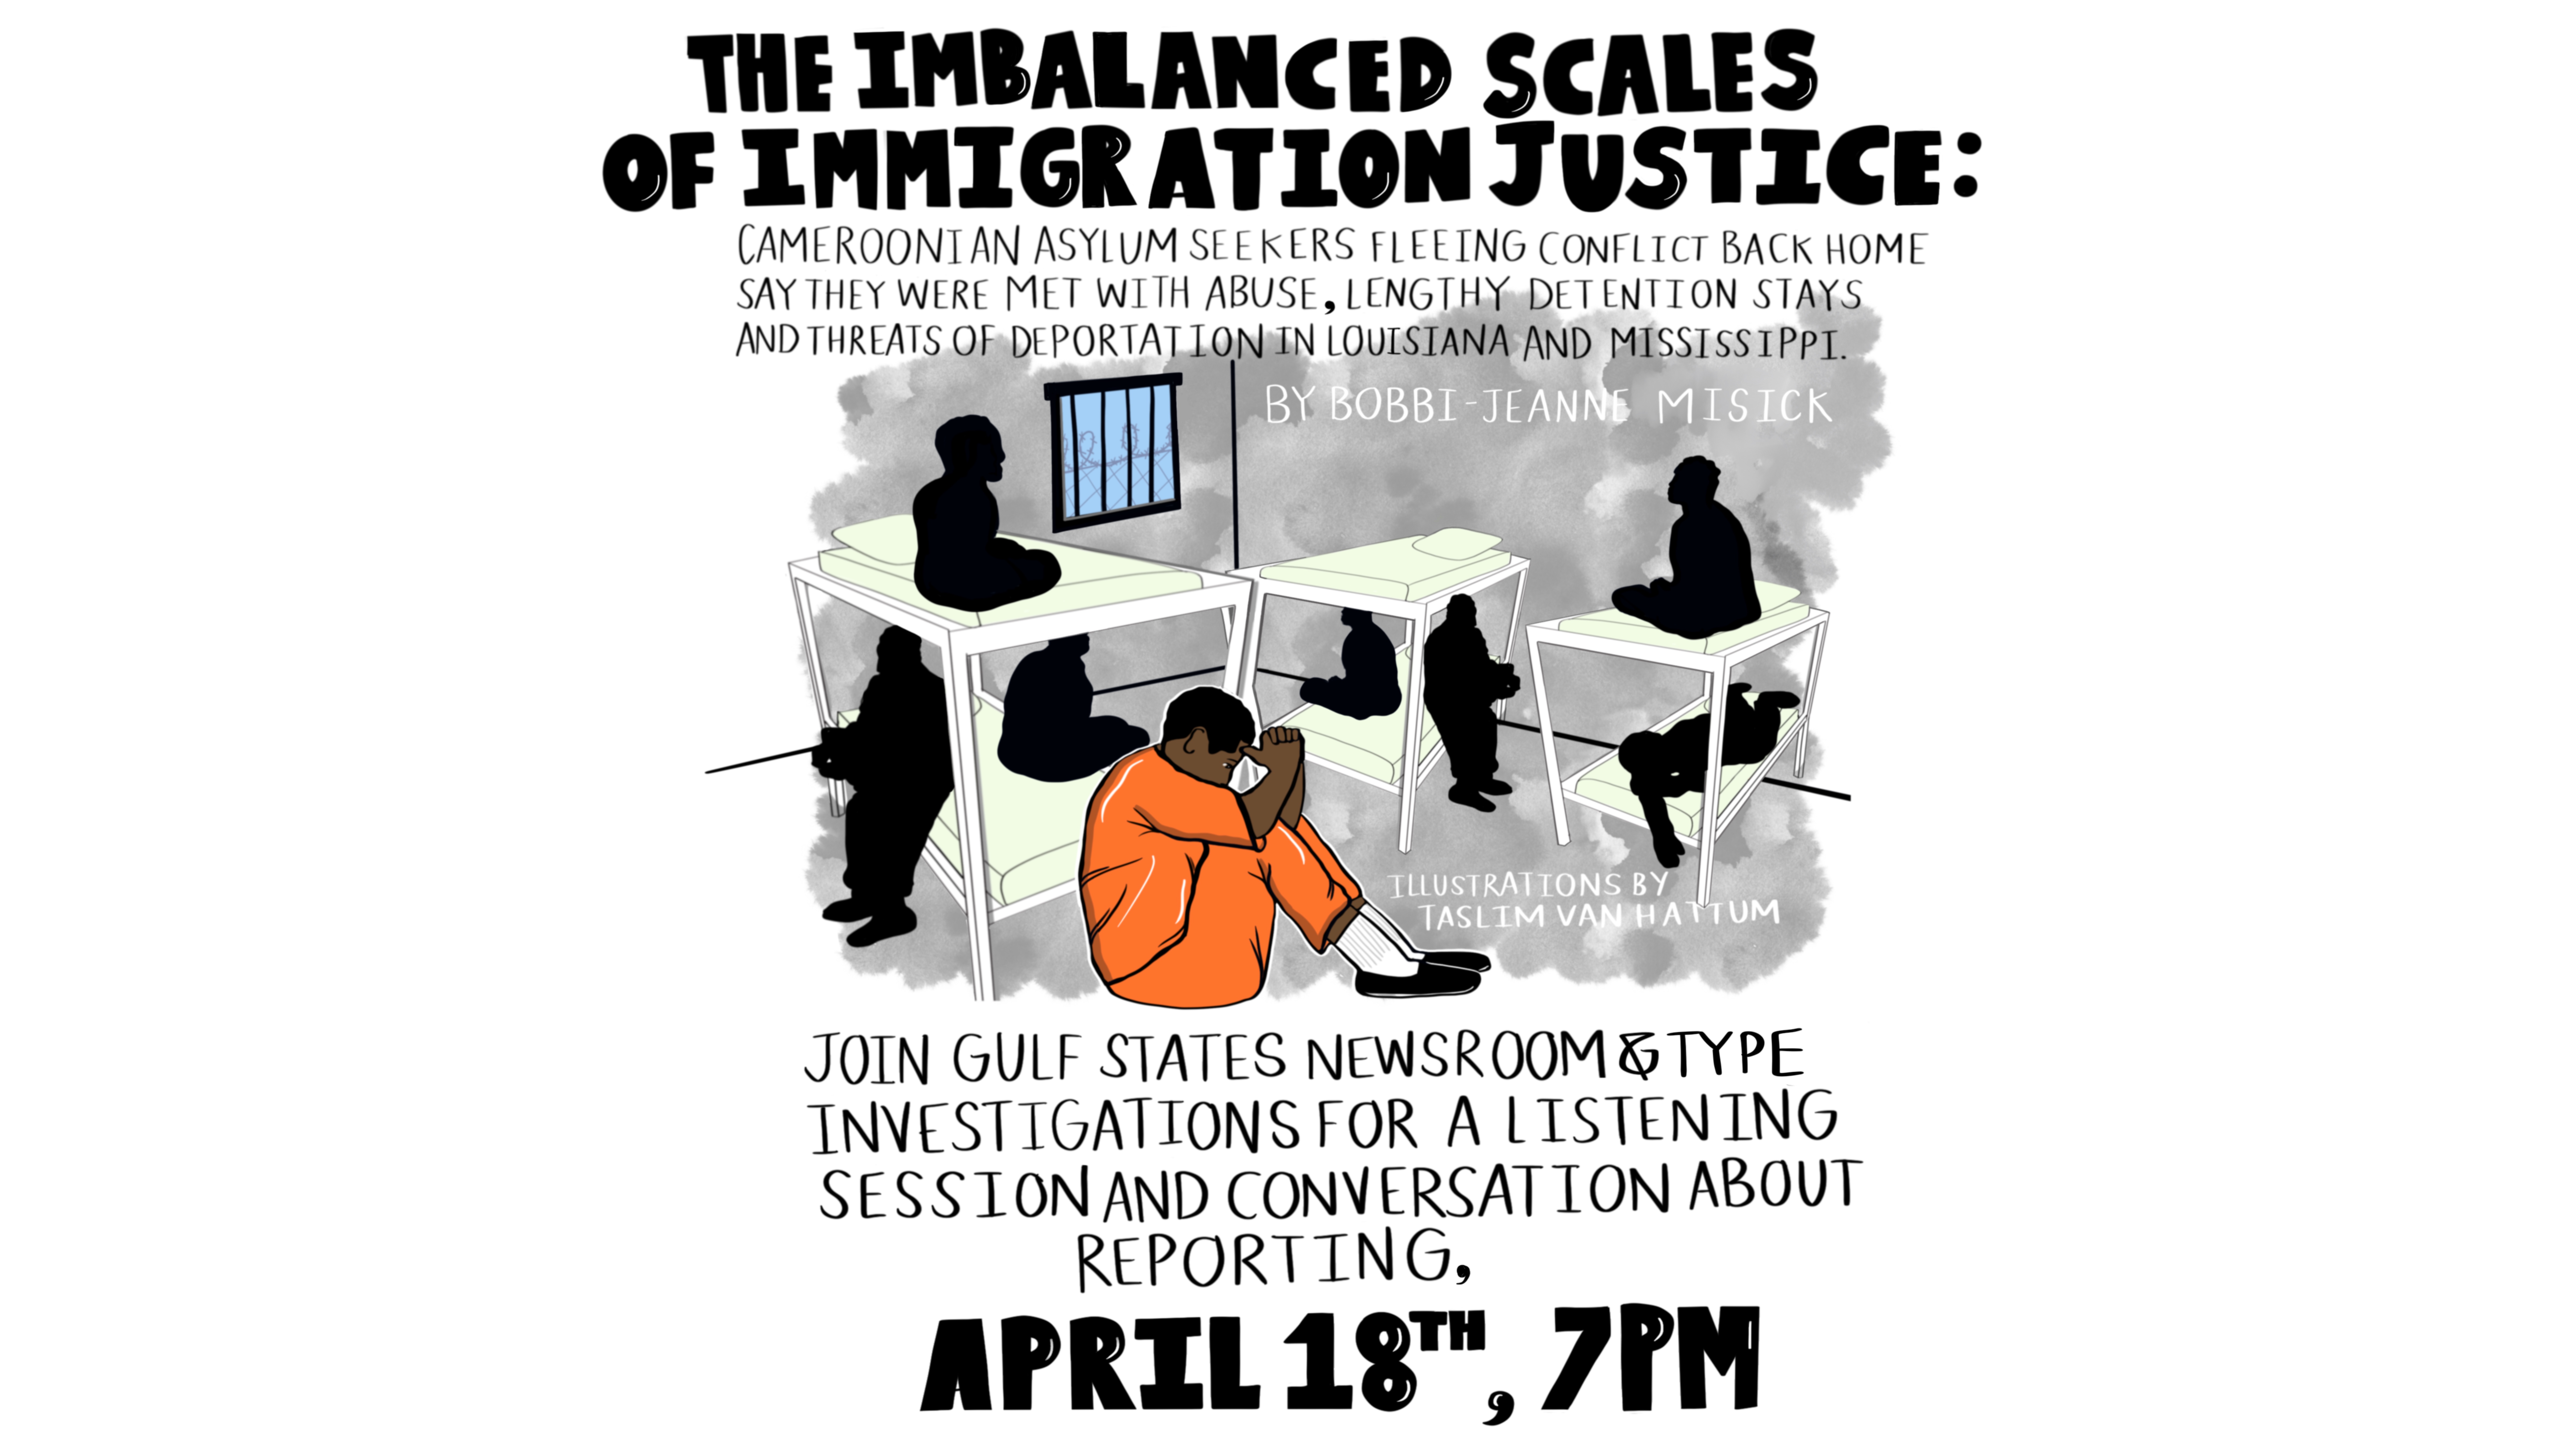 The Gulf States Newsroom and Type Investigations will host a virtual listening session and conversation on Bobbi-Jeanne Misick’s ‘The imbalance scales of immigration justice’ series on April 18.